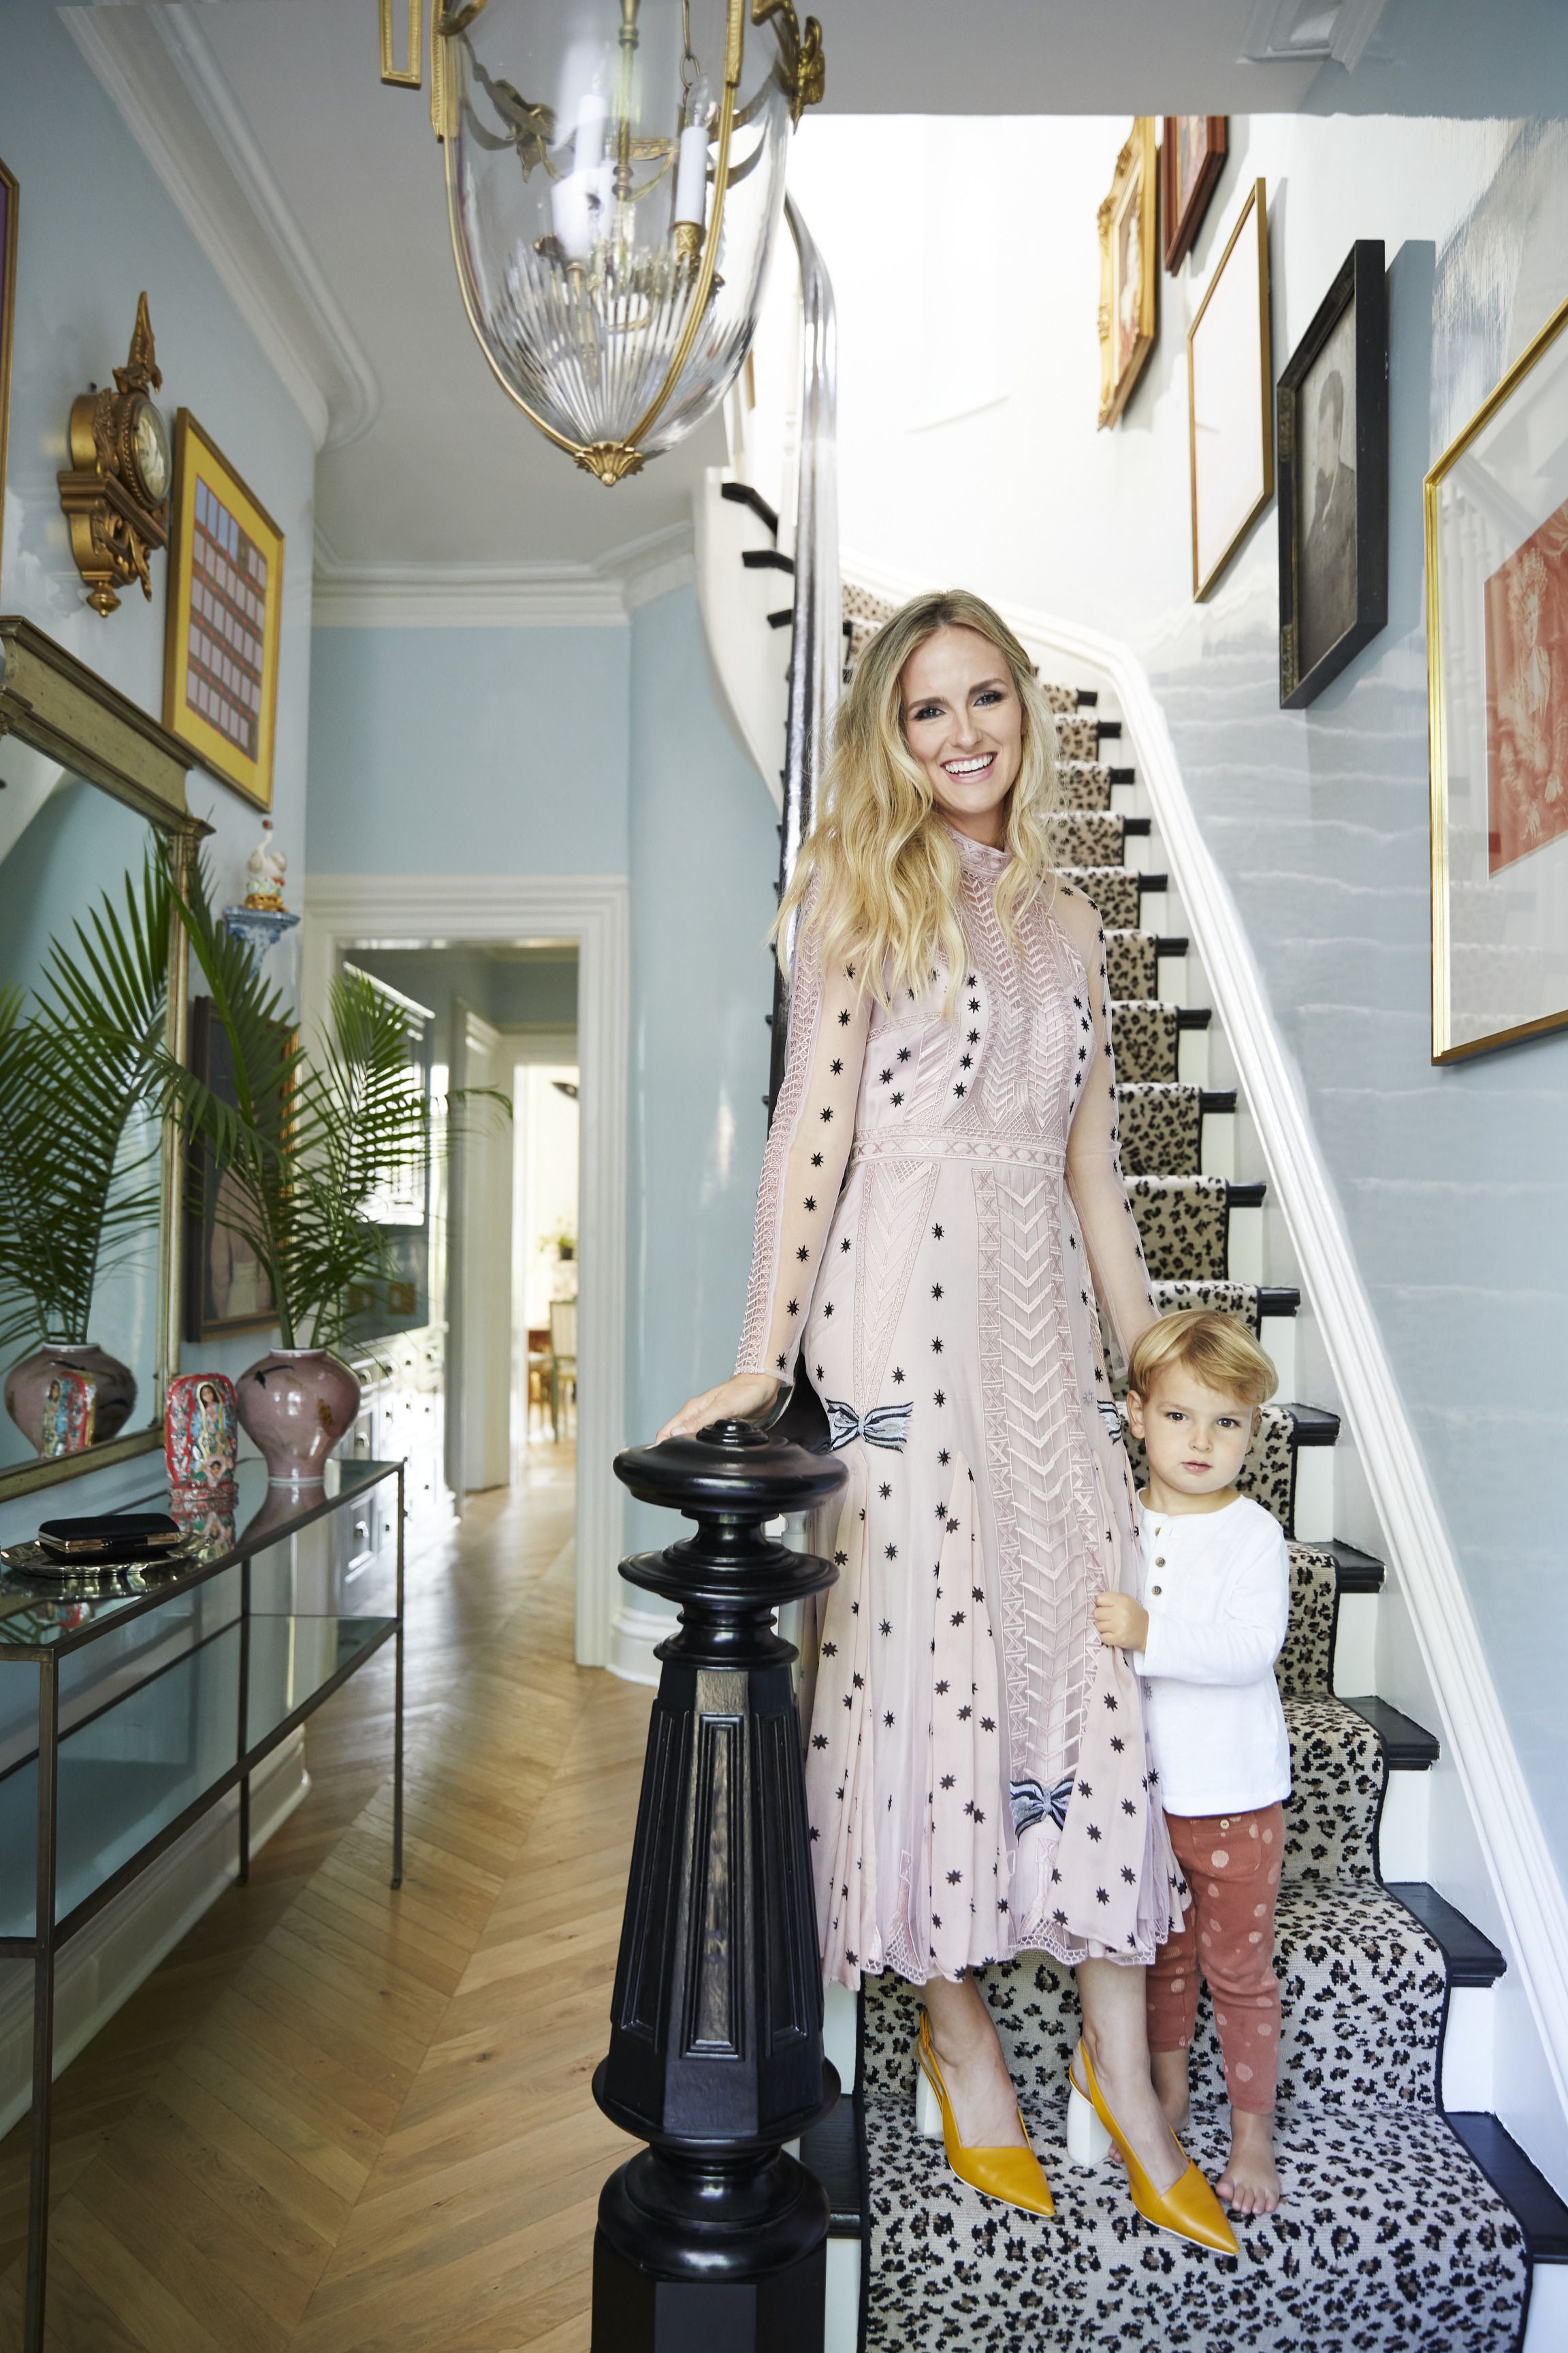 summer and her son welcome guests on an entry stairwell cloaked in panther print carpet